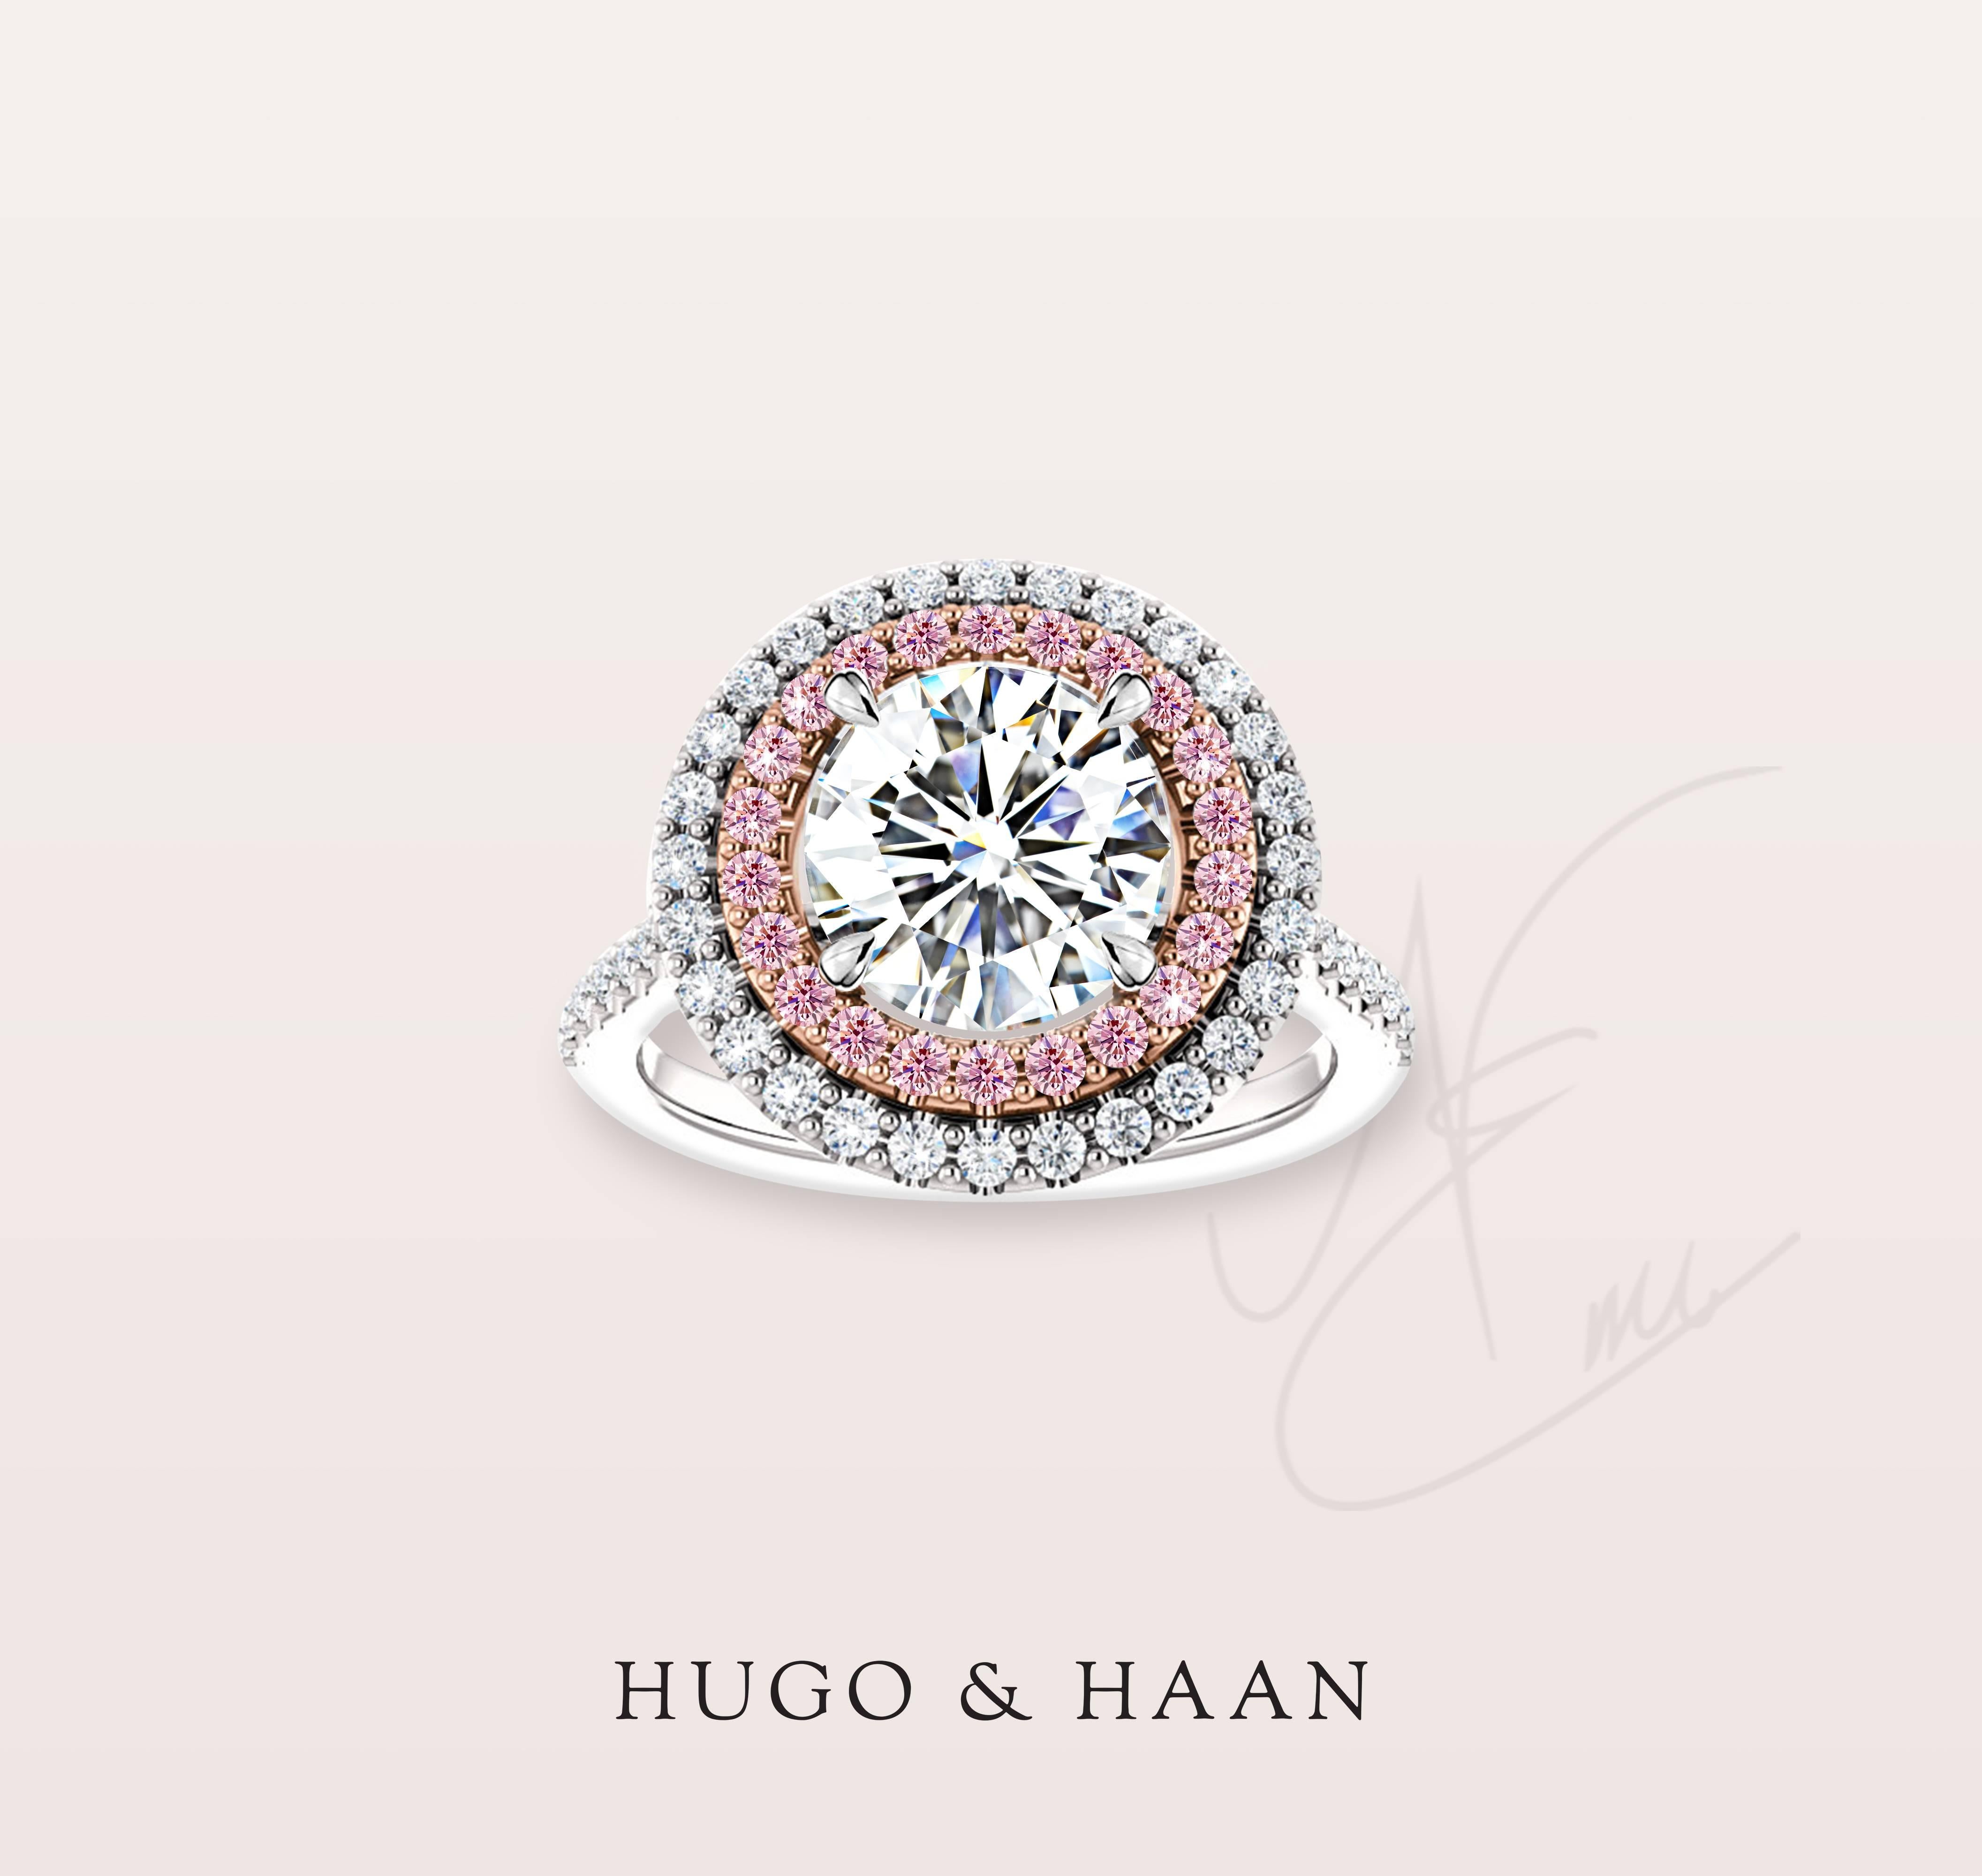 Details:

- GIA Certified 1.51 ct Round Brilliant Cut Diamond E / VS2 Triple Excellent 
-  Double Halo setting type
- One halo of AA quality pink sapphire set in 18kt Rose Gold
- F/VS Top Selection Diamond Pave on the rest of the ring
- Platinum
-